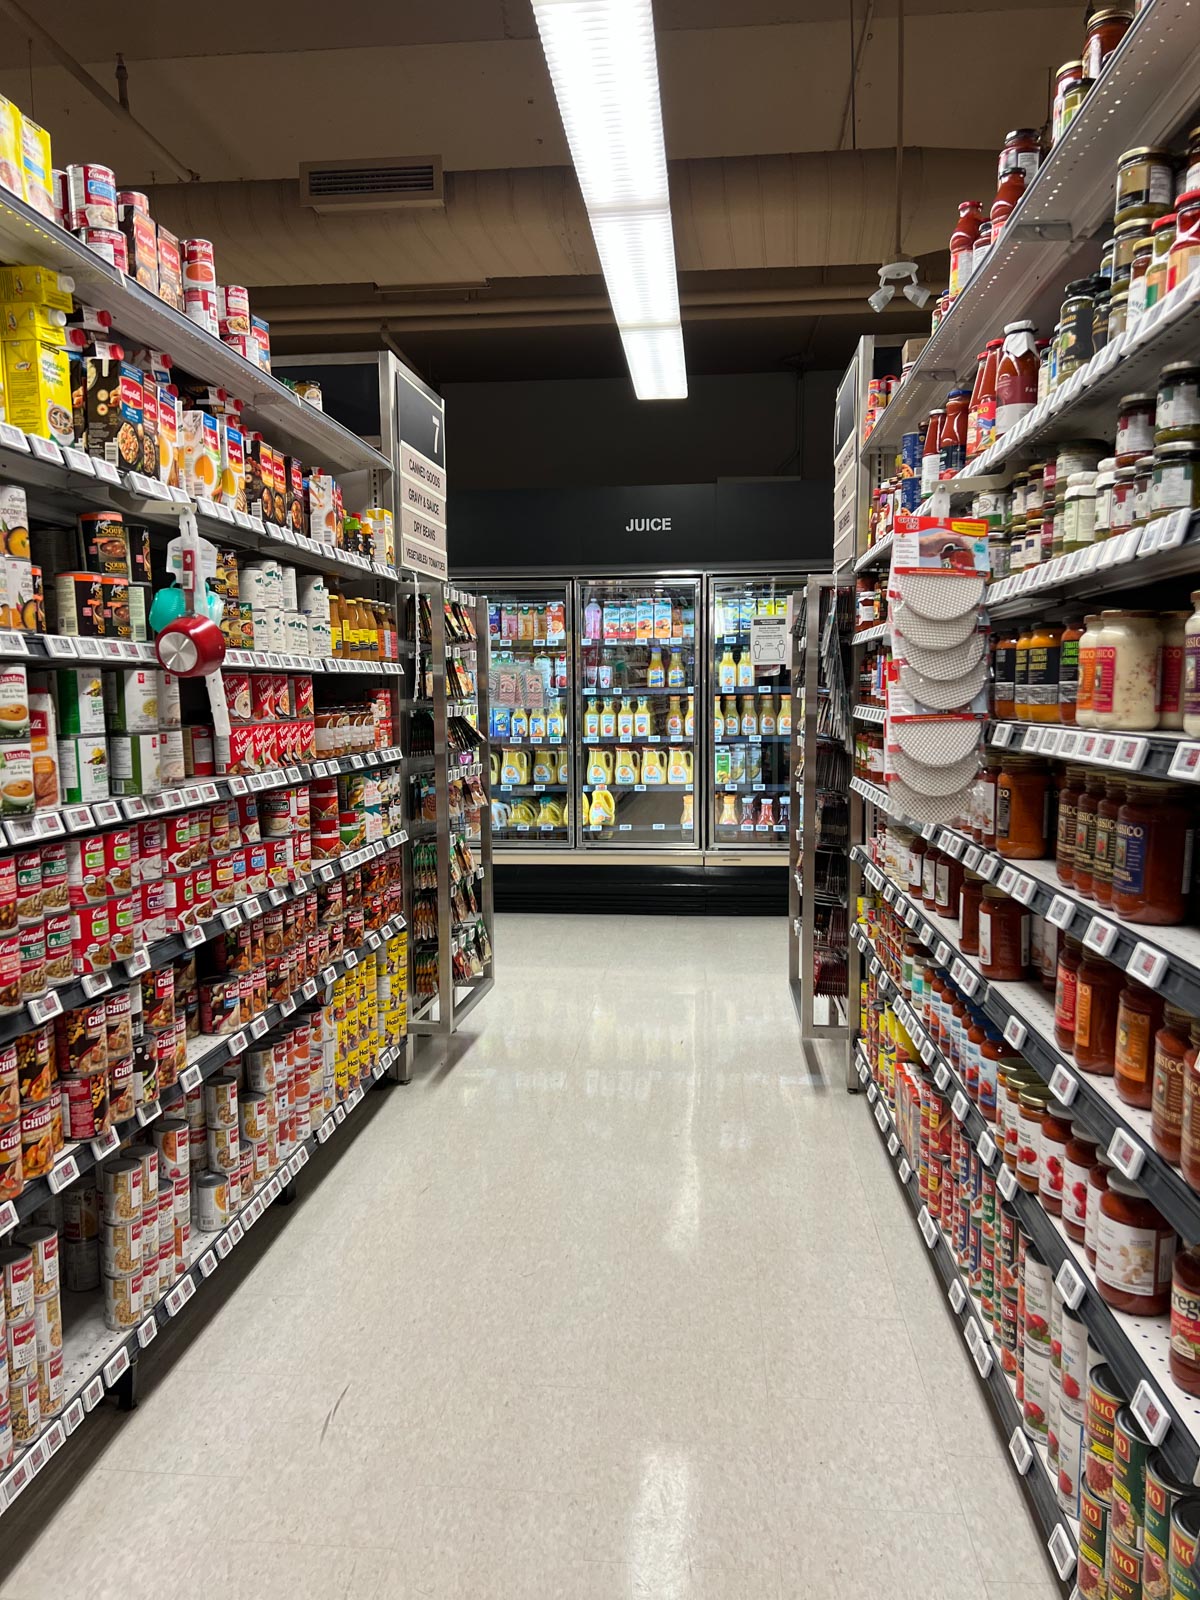 The canned goods aisle at the grocery store, including the juice section at the back.